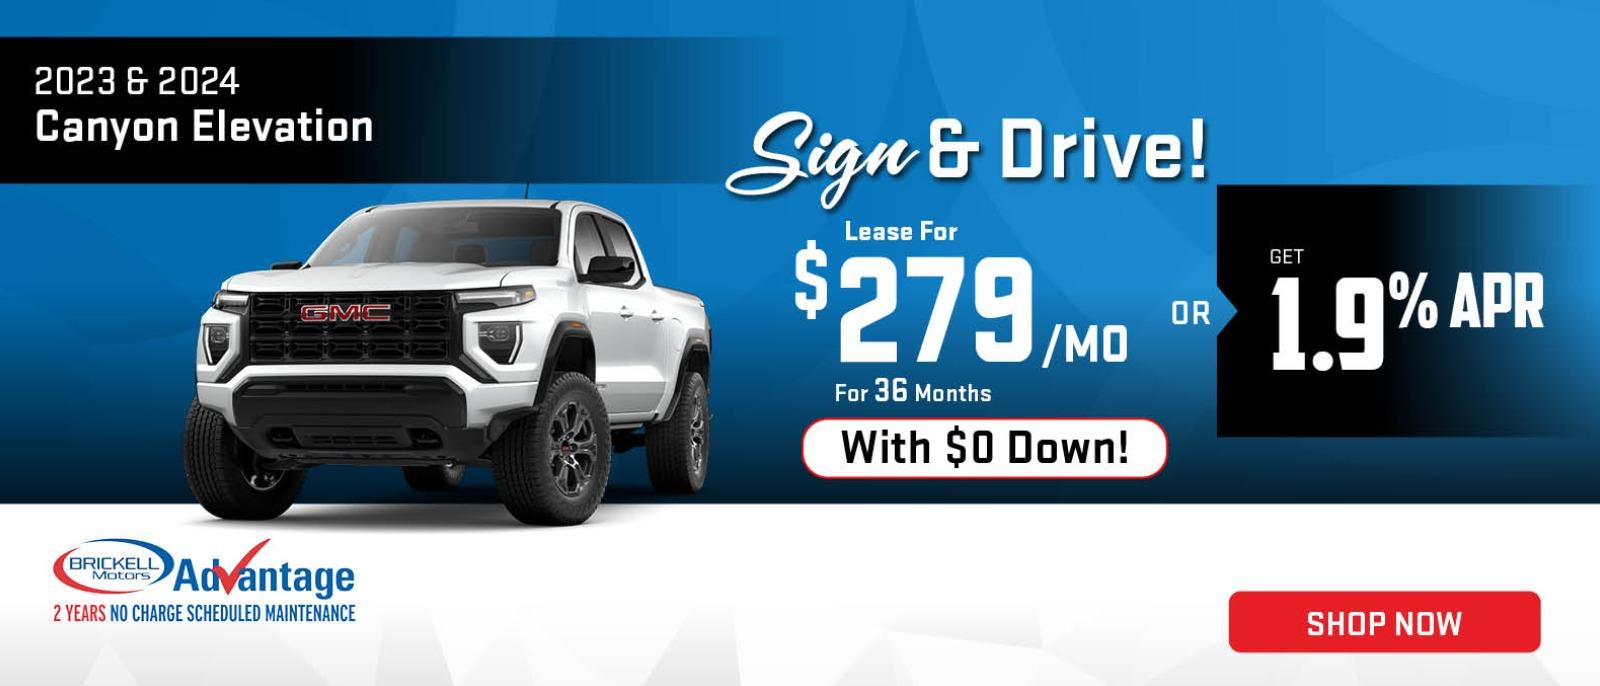 Sign & Drive
Lease for $279 per month for 36 months with $0 down
Or Get 1.9% APR